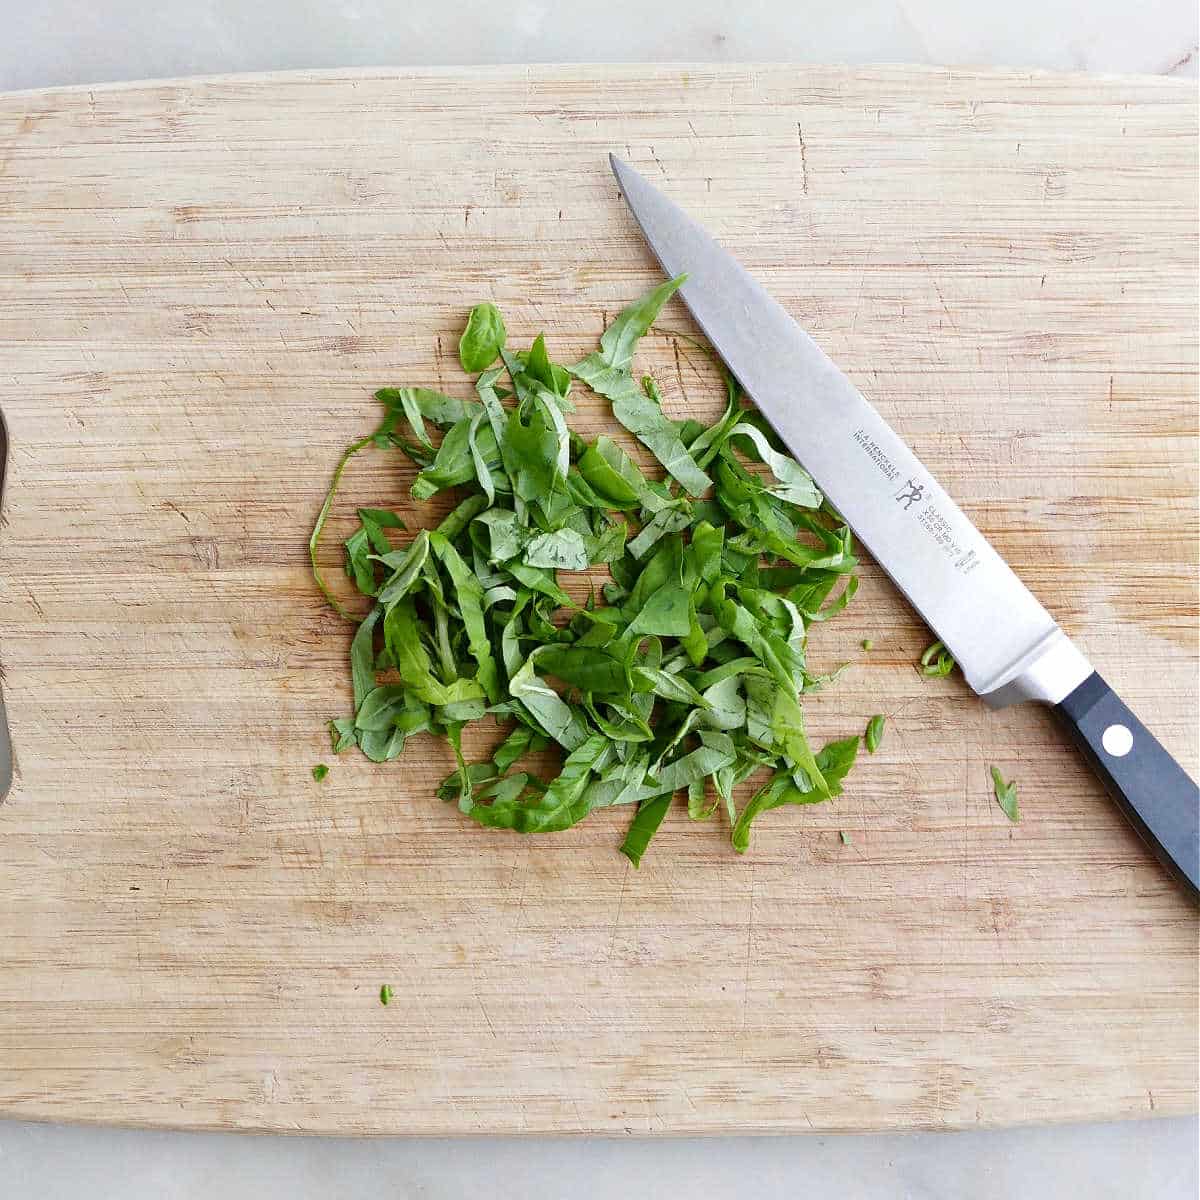 basil cut into chiffonade pieces on a cutting board next to a knife